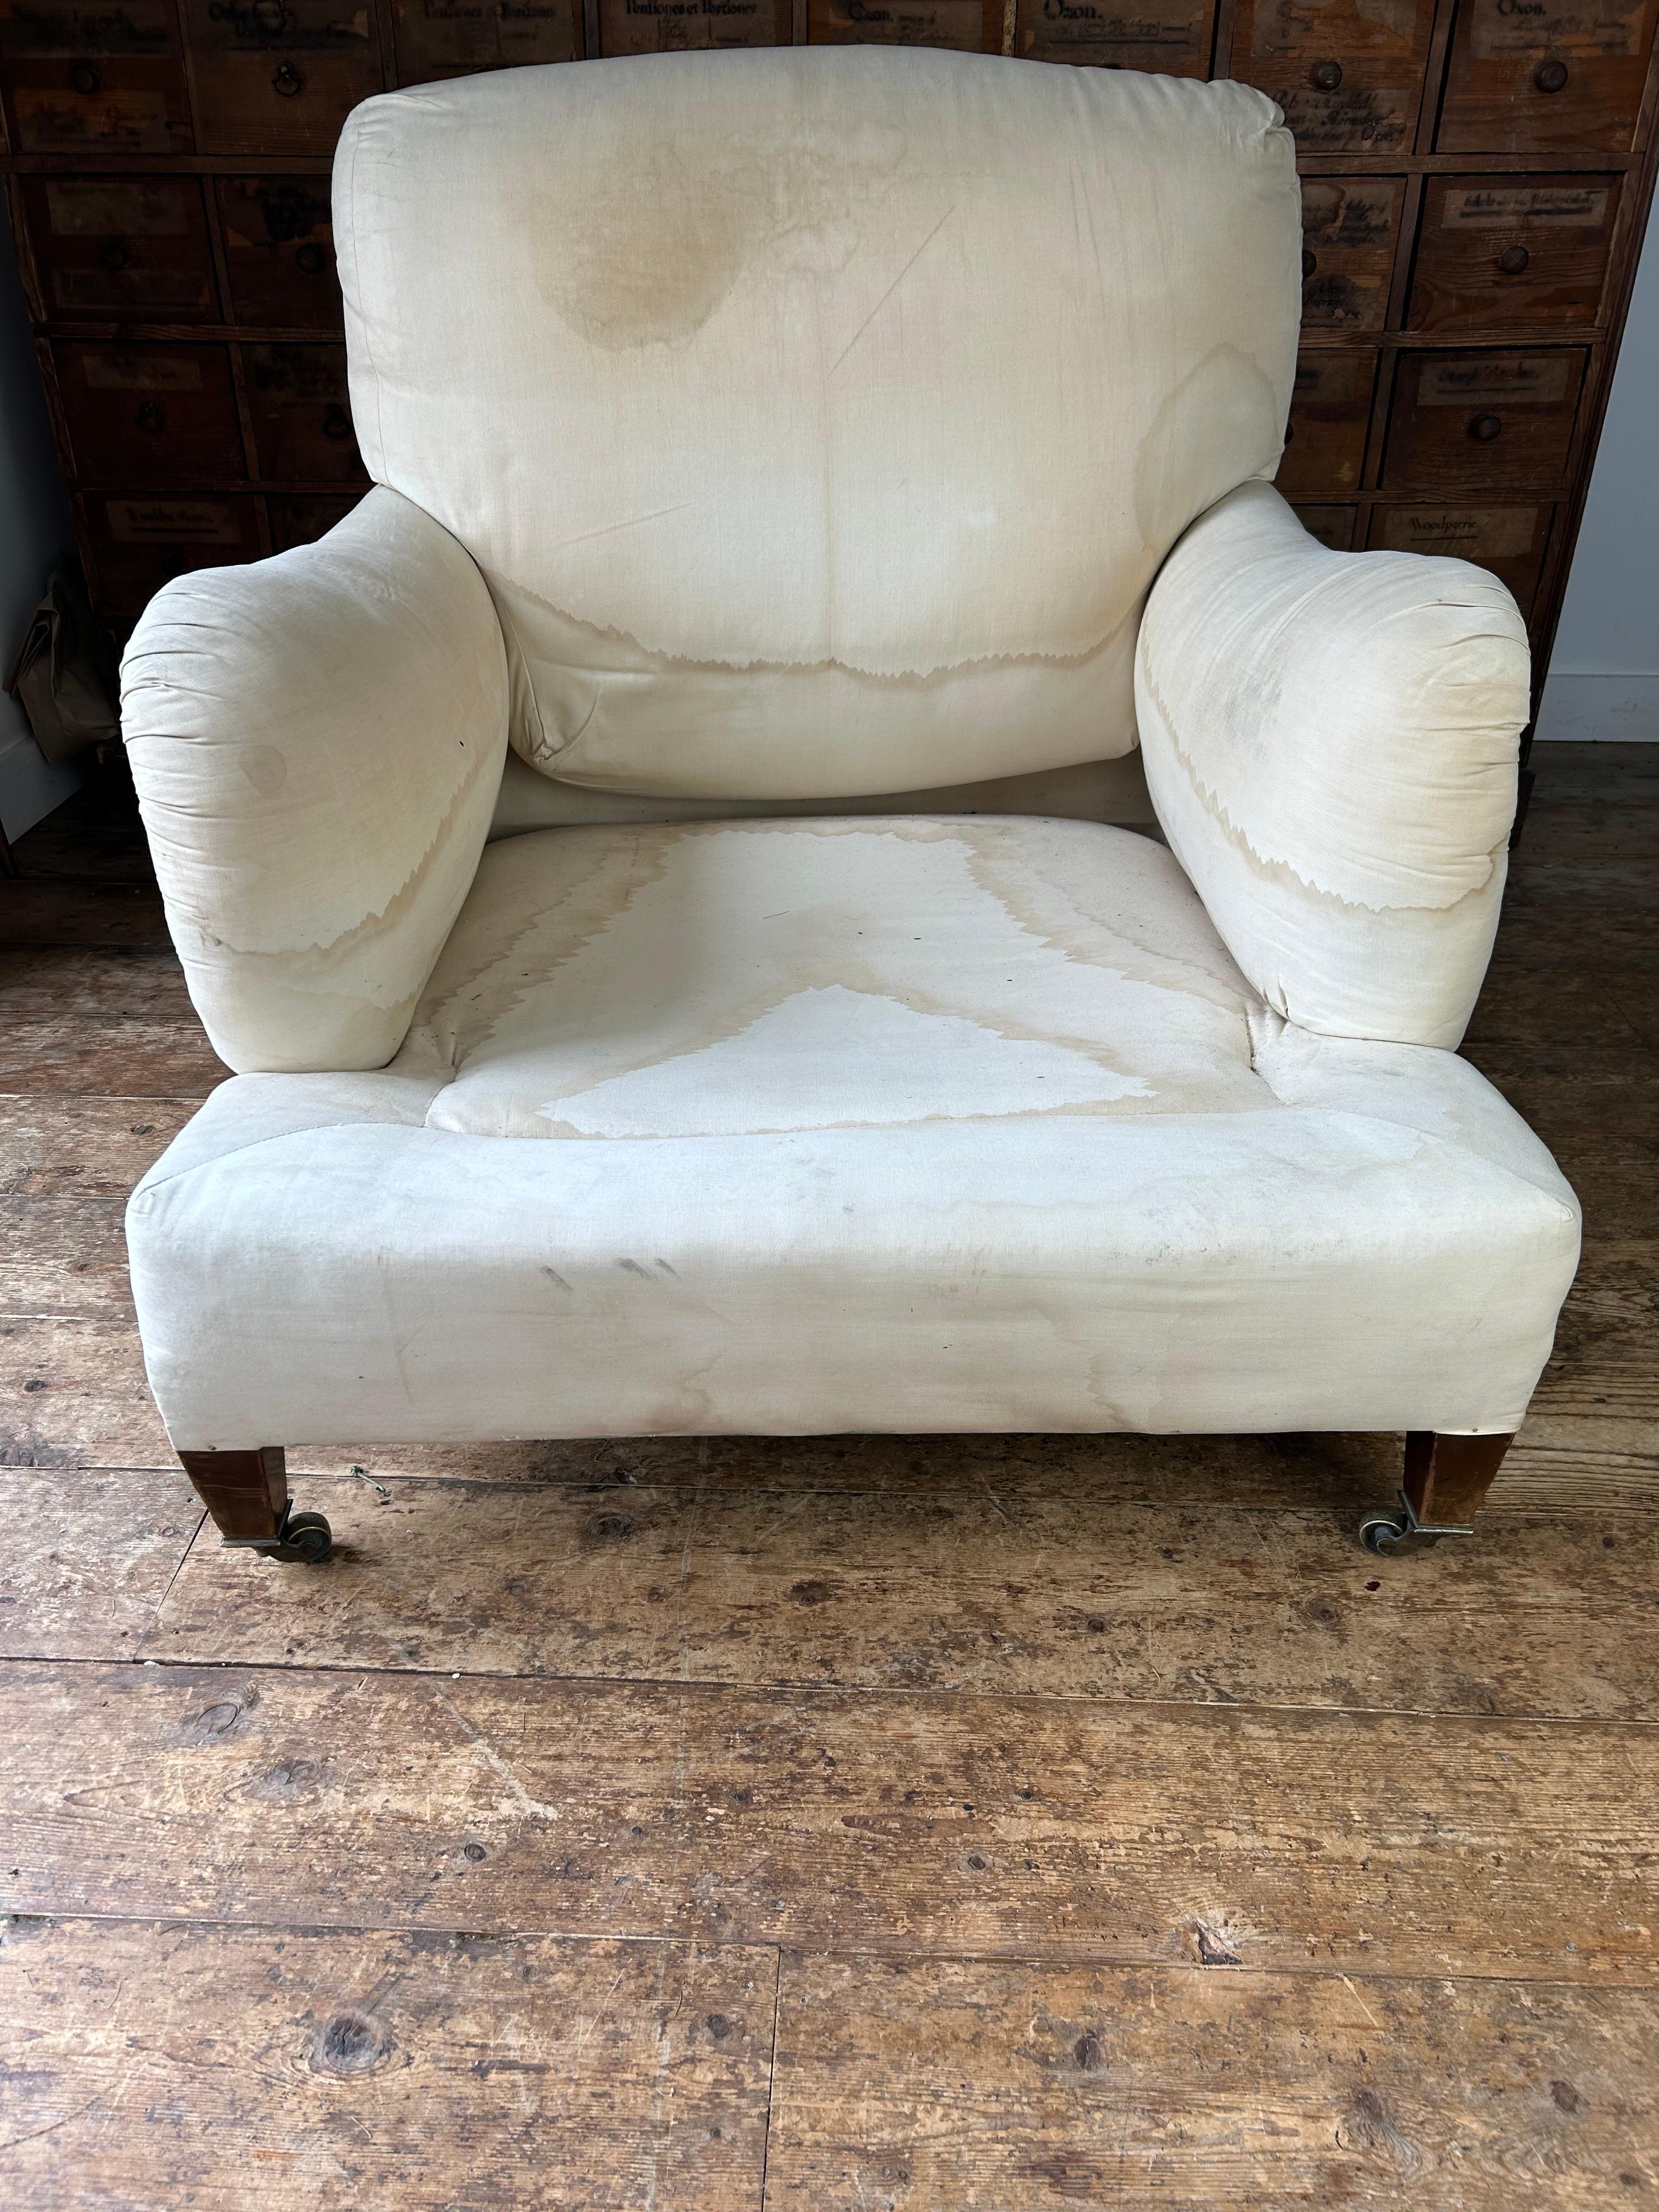 The Ivor model Howard and Sons armchair is the most rare and sort after, being of the most generous proportions. Retaining it’s original upholstery in the calico, it is reassuringly stamped on the back leg with two sets of numbers and Howard and